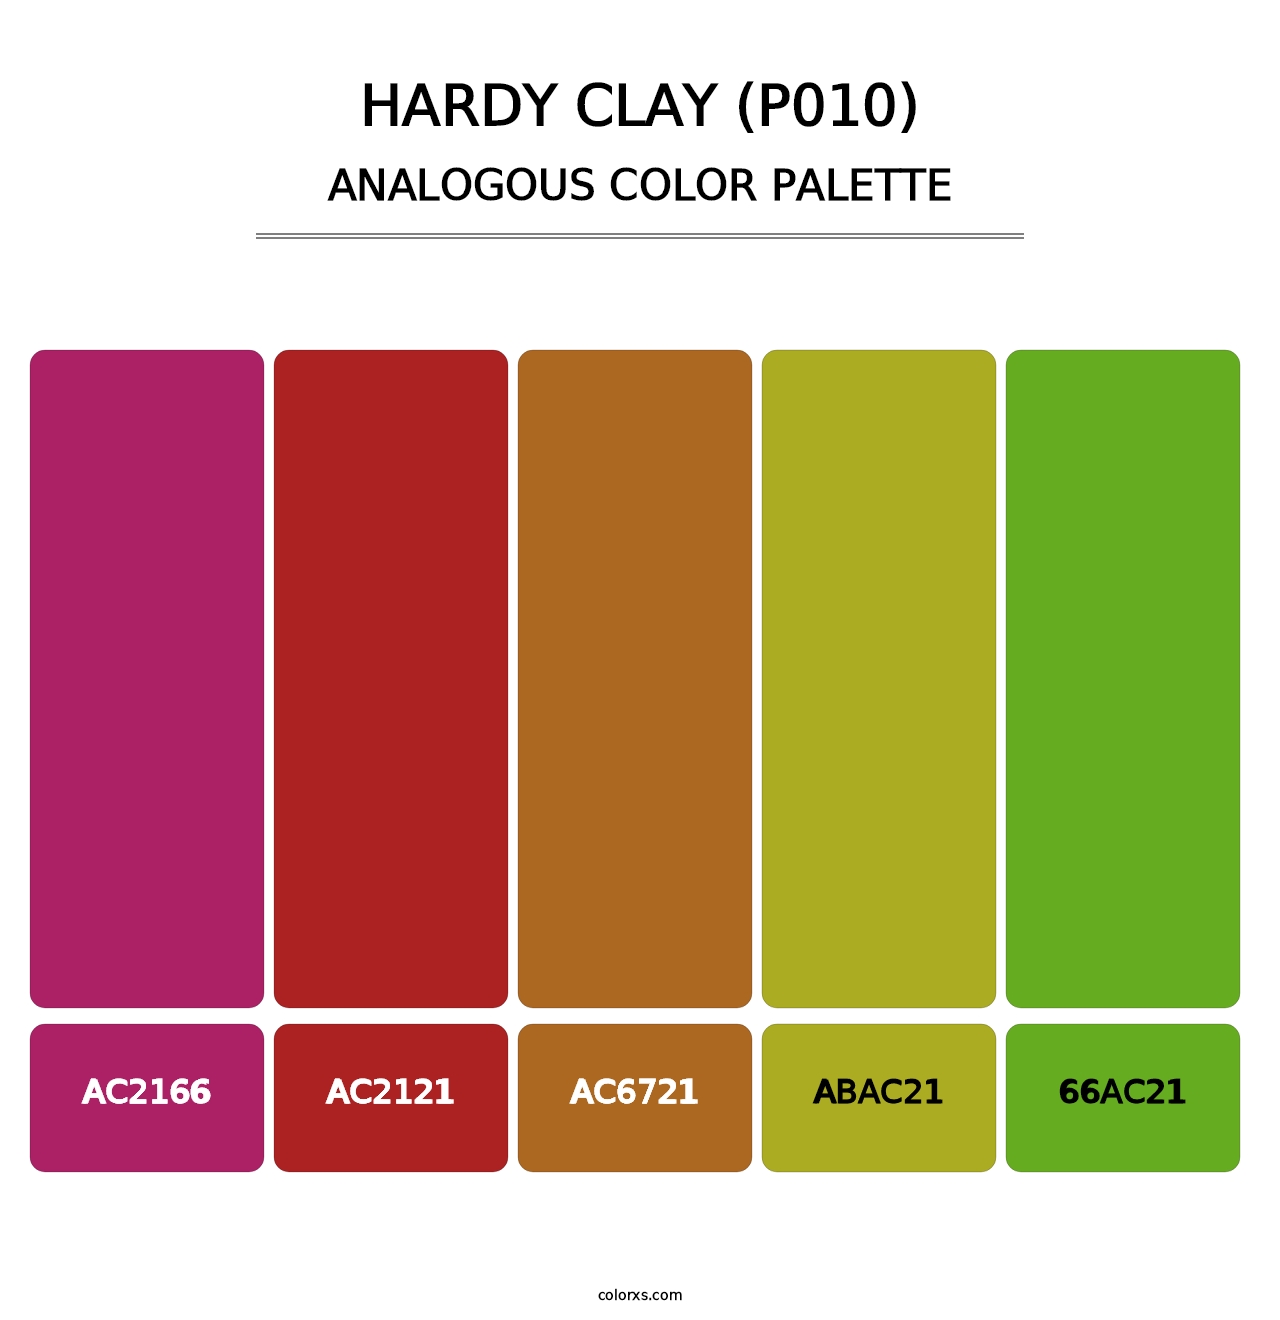 Hardy Clay (P010) - Analogous Color Palette